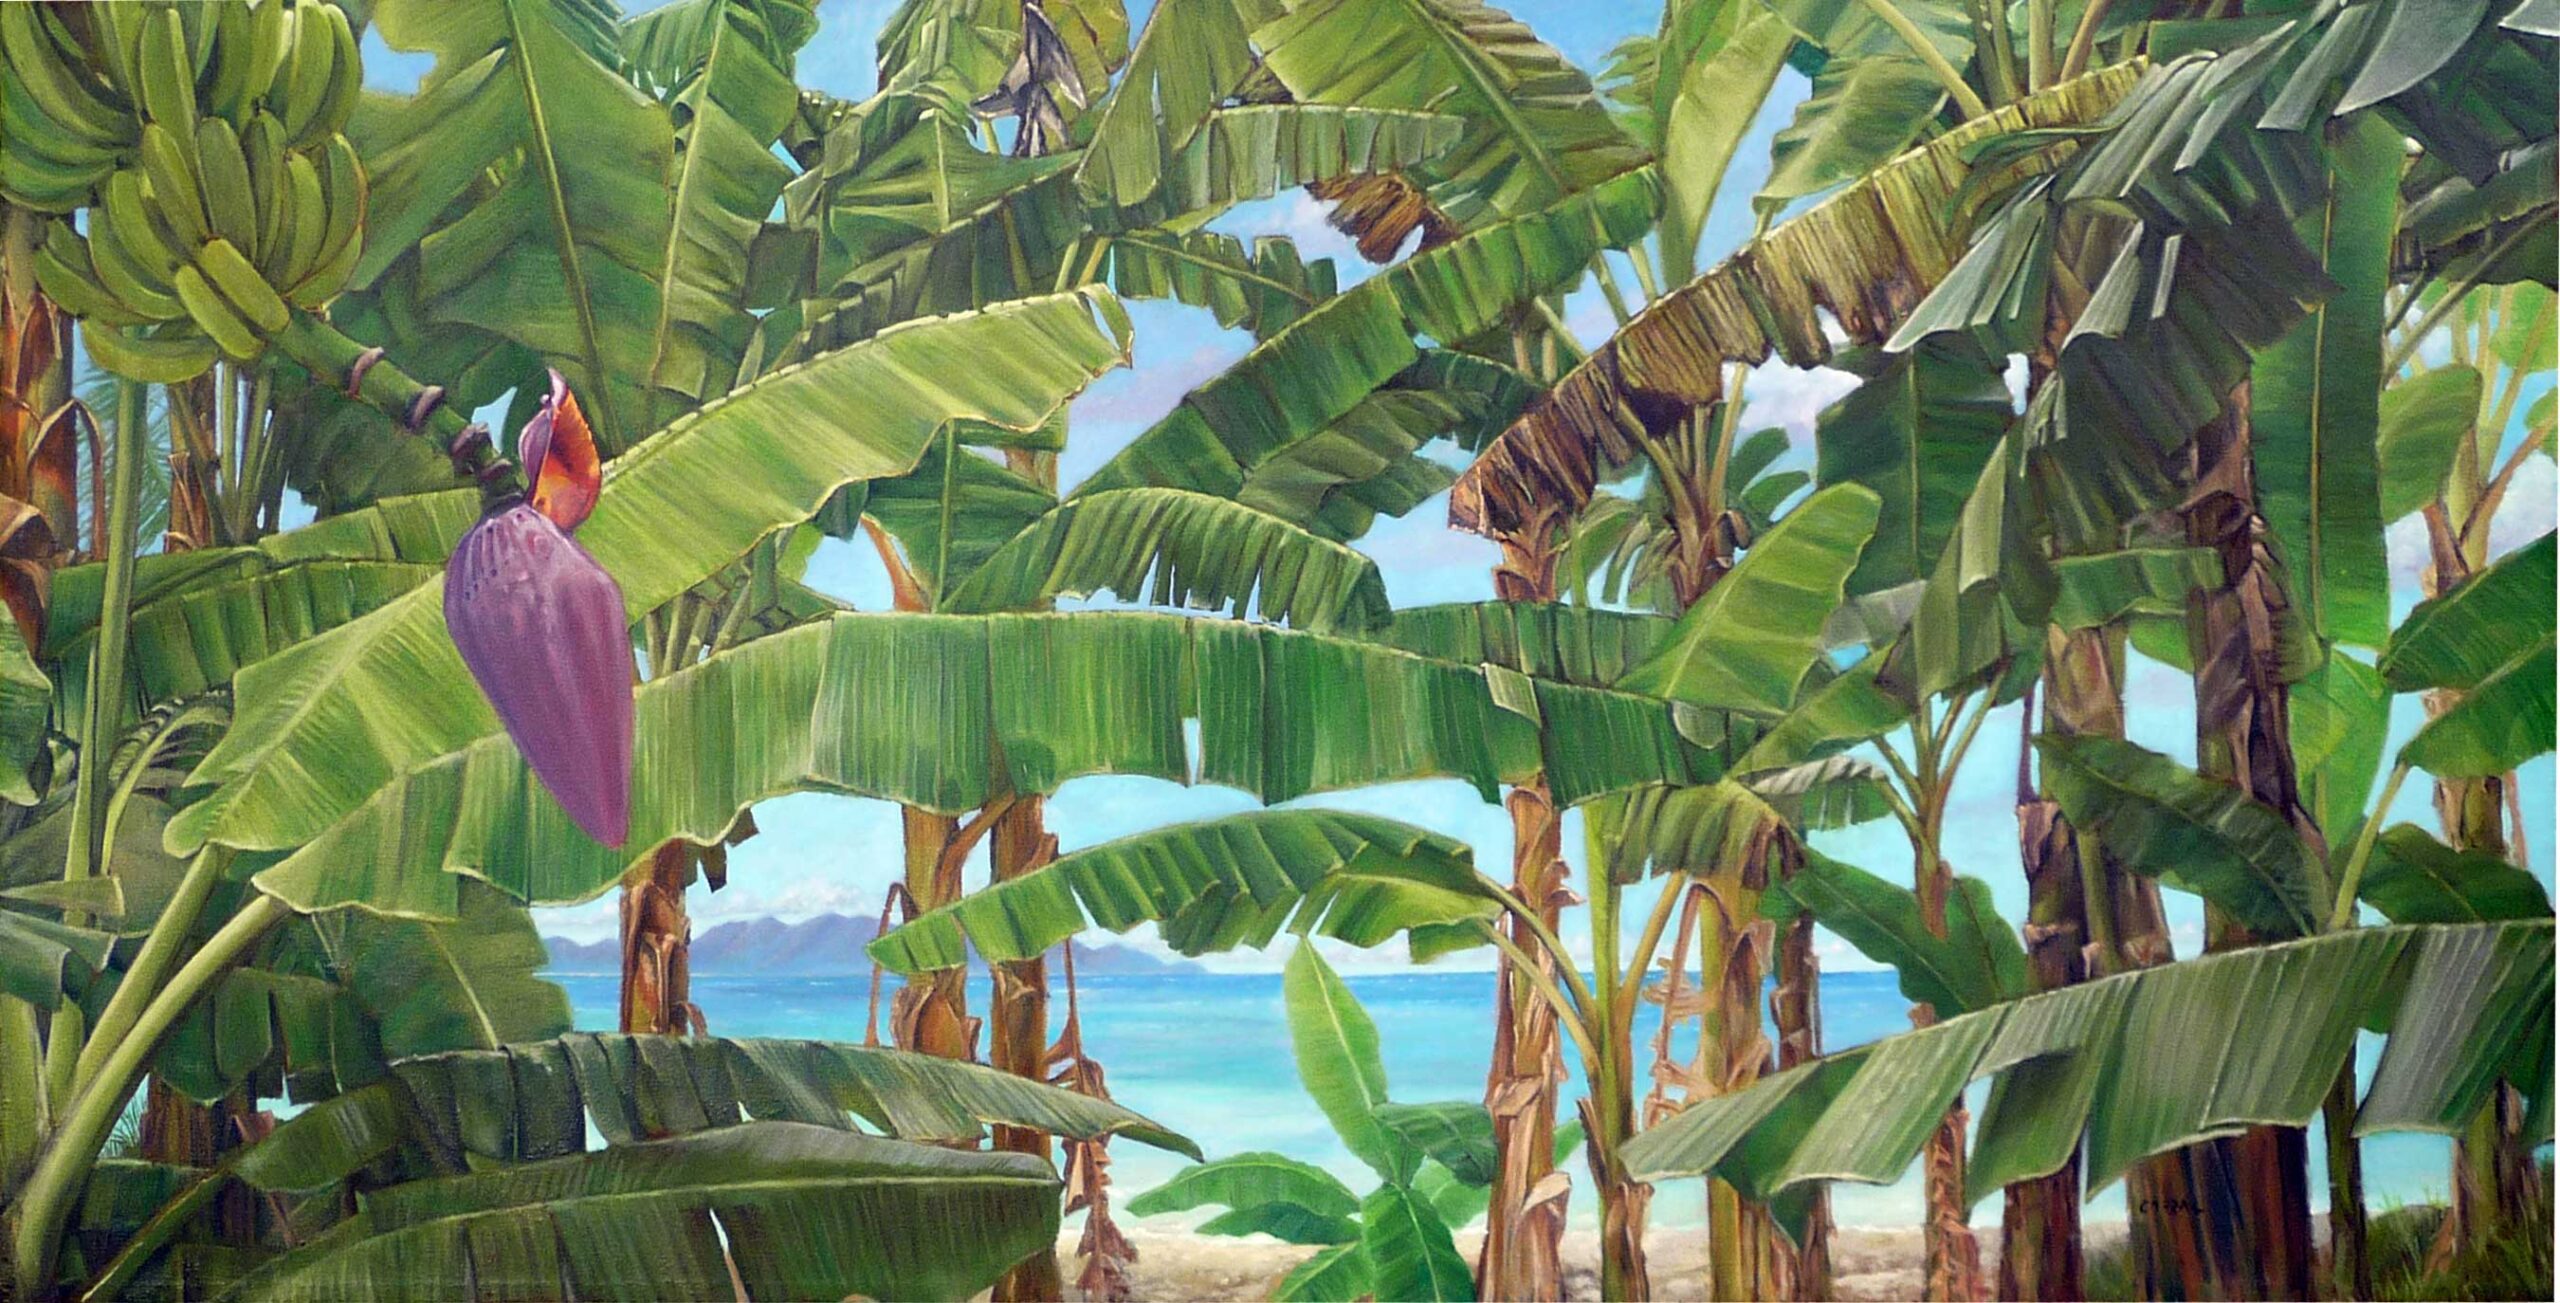 Jorge Carral, "La Playita (Small Beach)," 2011, oil on canvas, 29 1/2 x 59 in., private collection, Woodlands, Spring, Texas